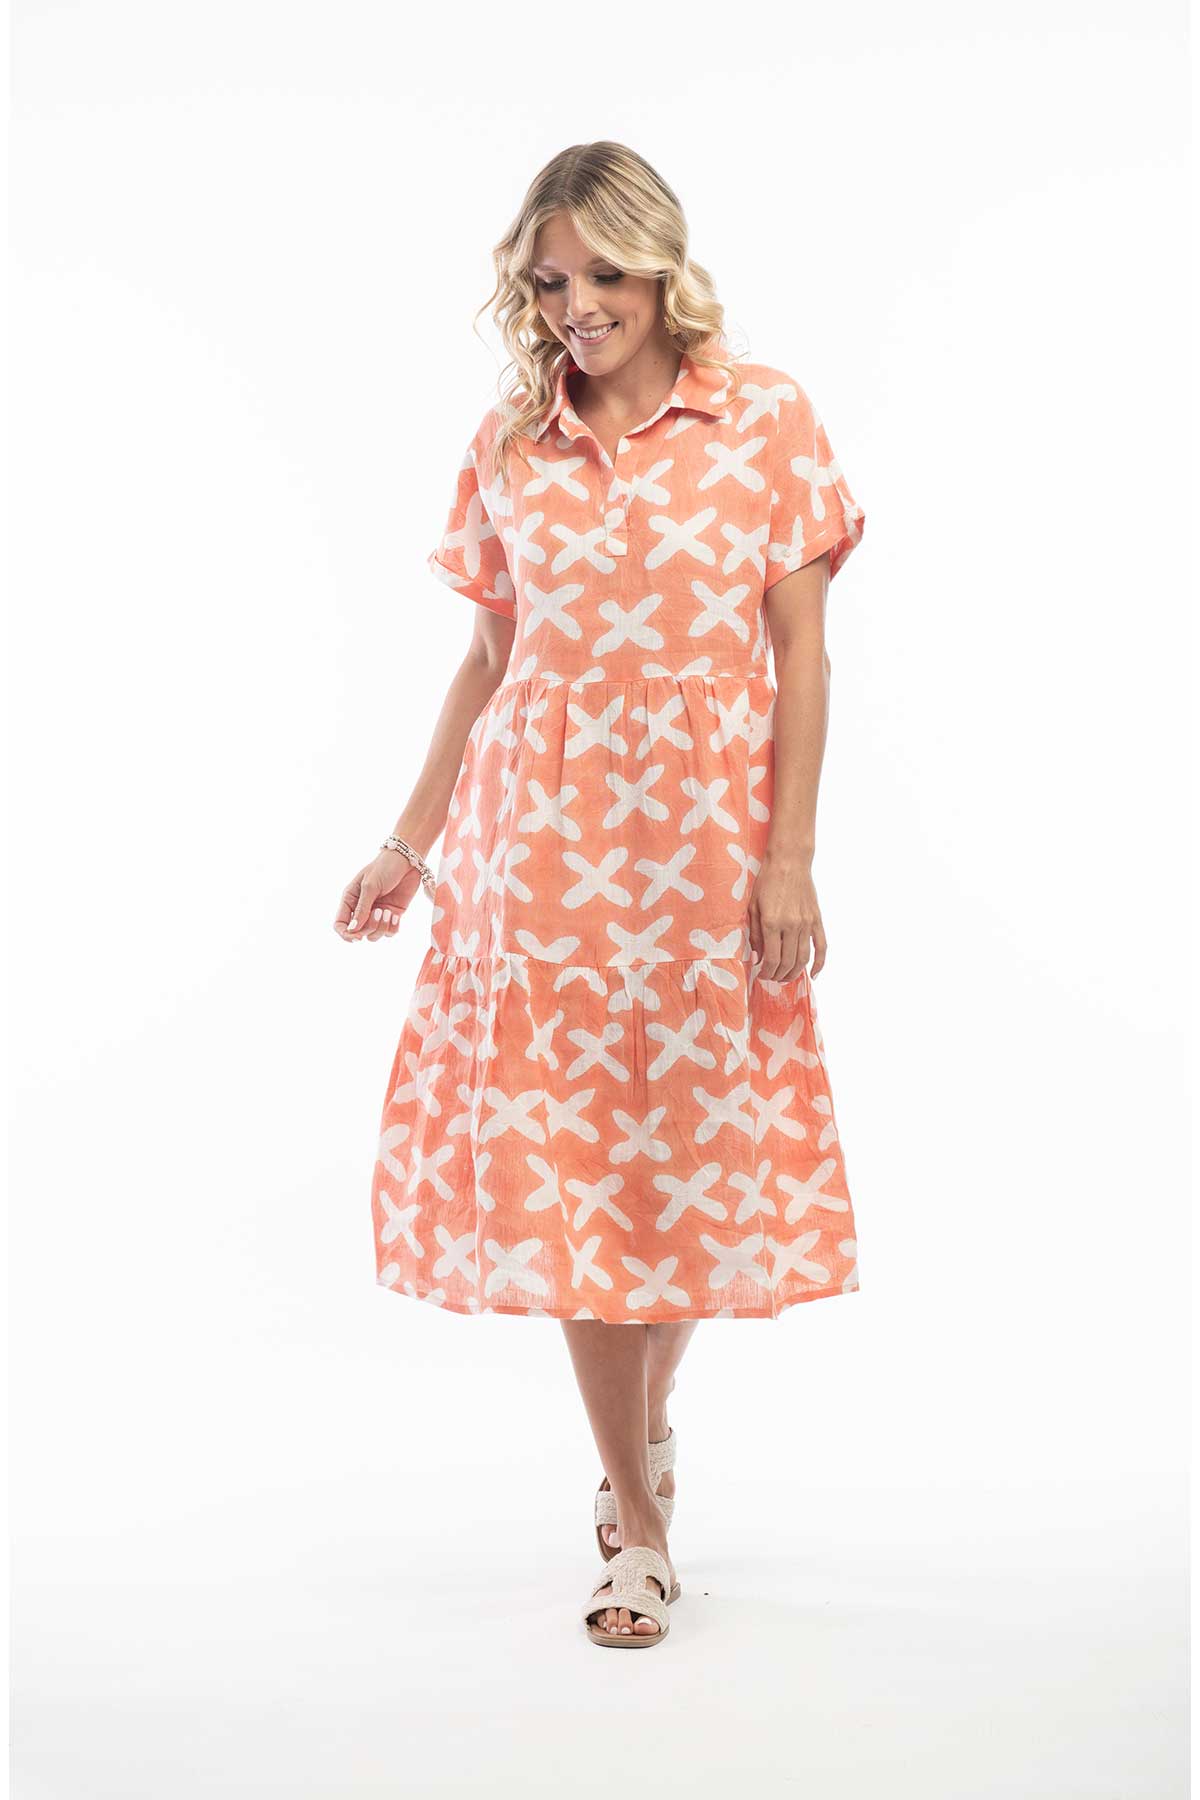 Orientique Dress - Print Pure Linen Dress Collar Midi Layers in coral front view